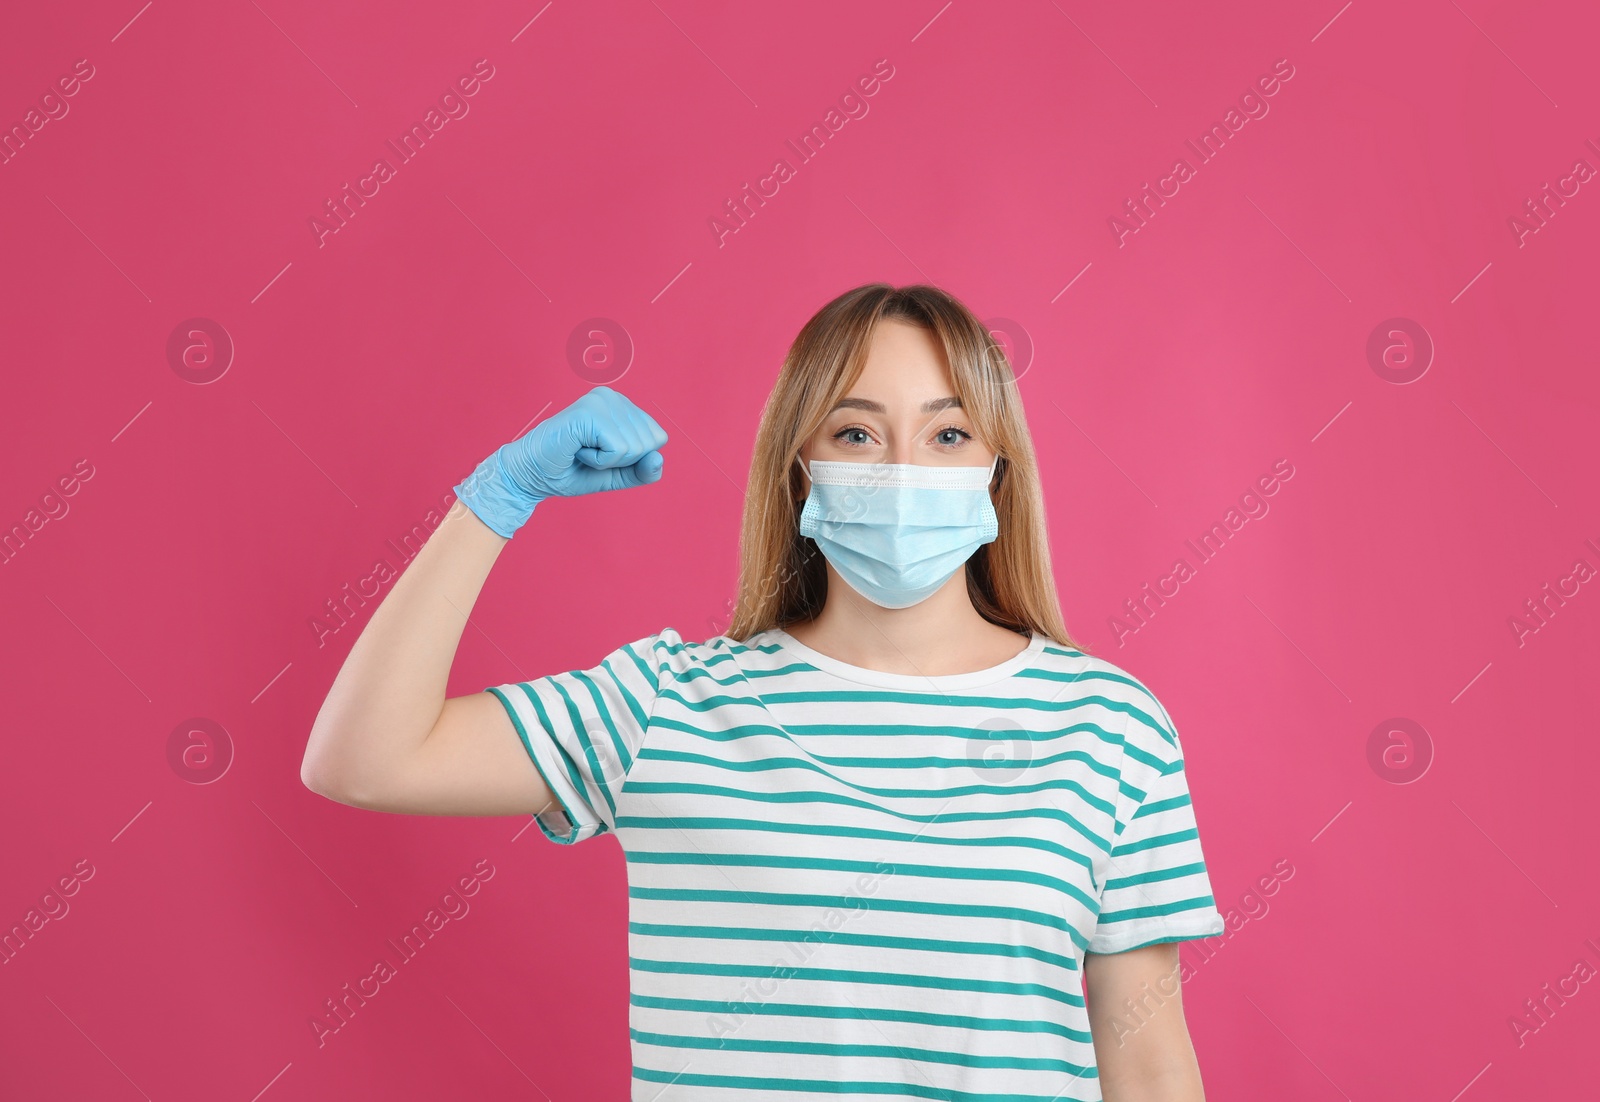 Photo of Woman with protective mask and gloves showing muscles on pink background. Strong immunity concept